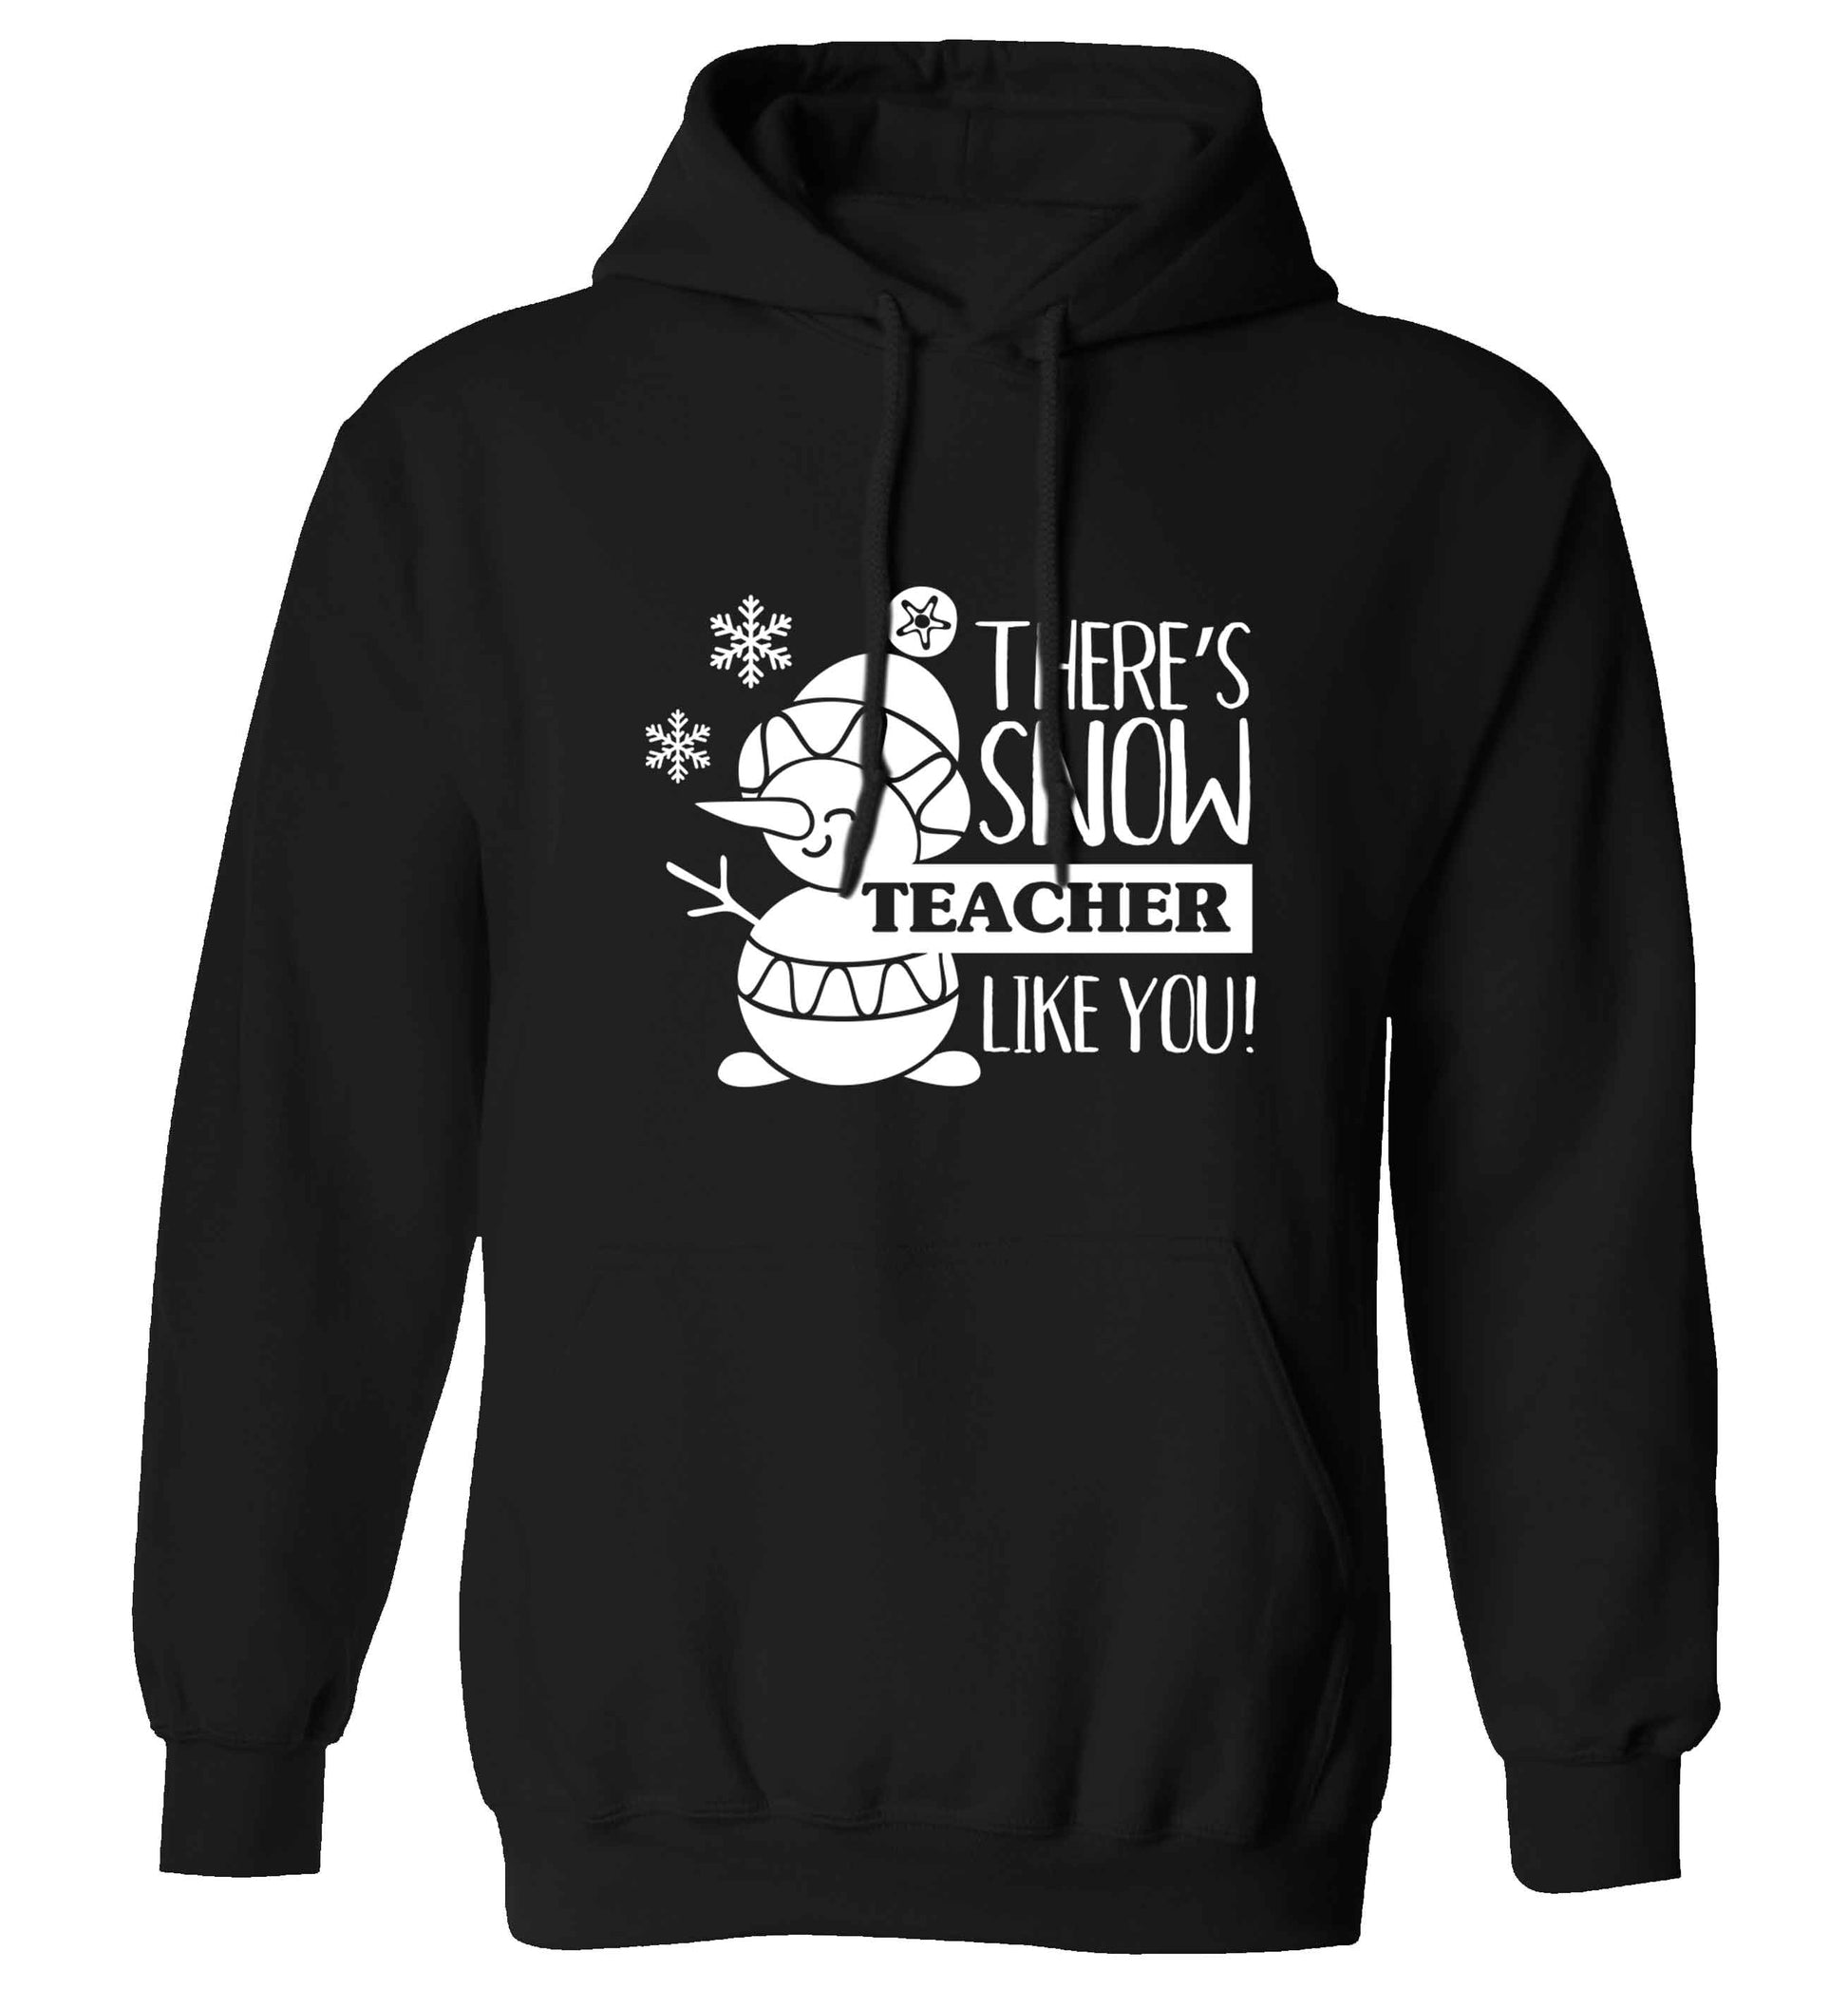 There's snow teacher like you adults unisex black hoodie 2XL